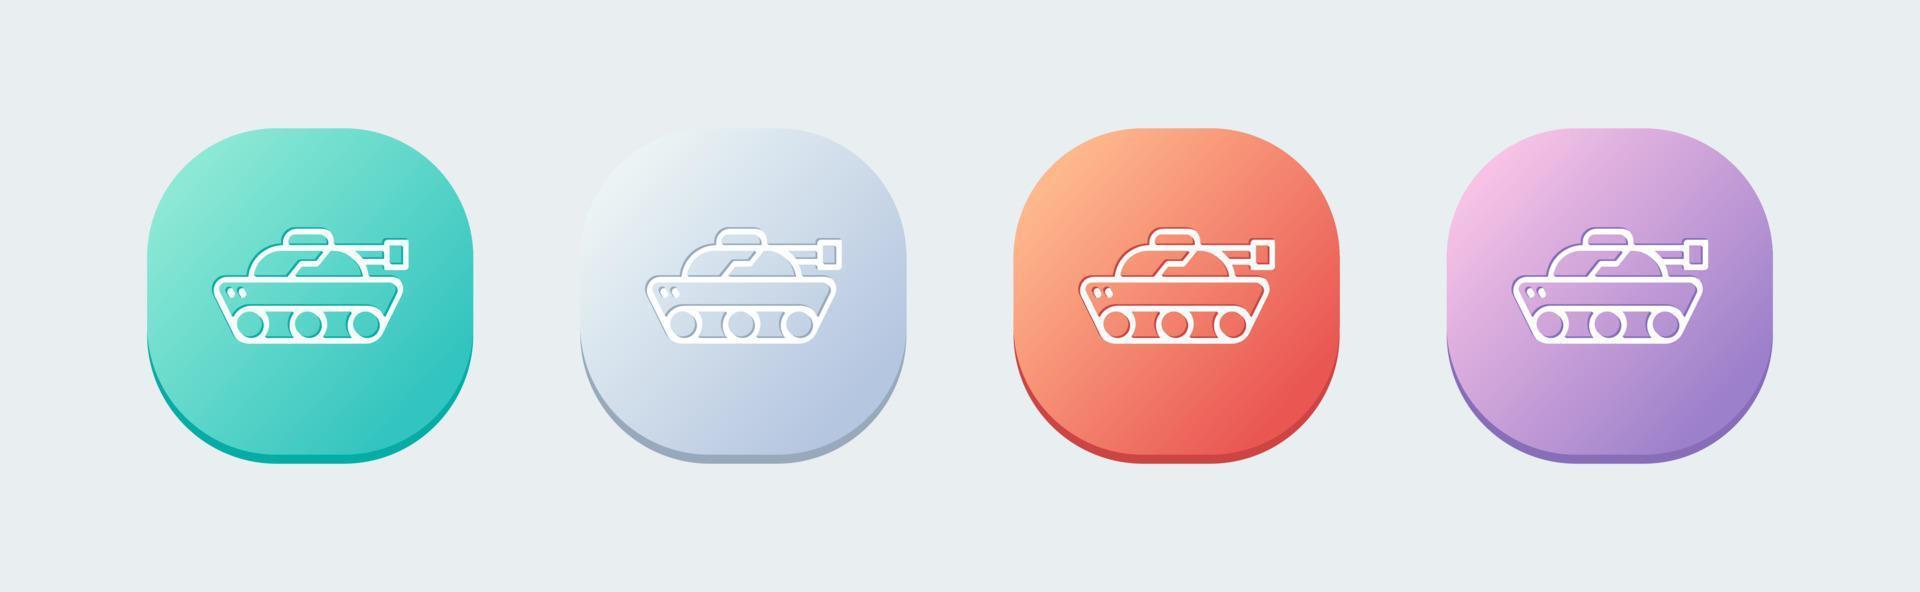 Military tank line icon in flat design style. War weapon signs vector illustration.